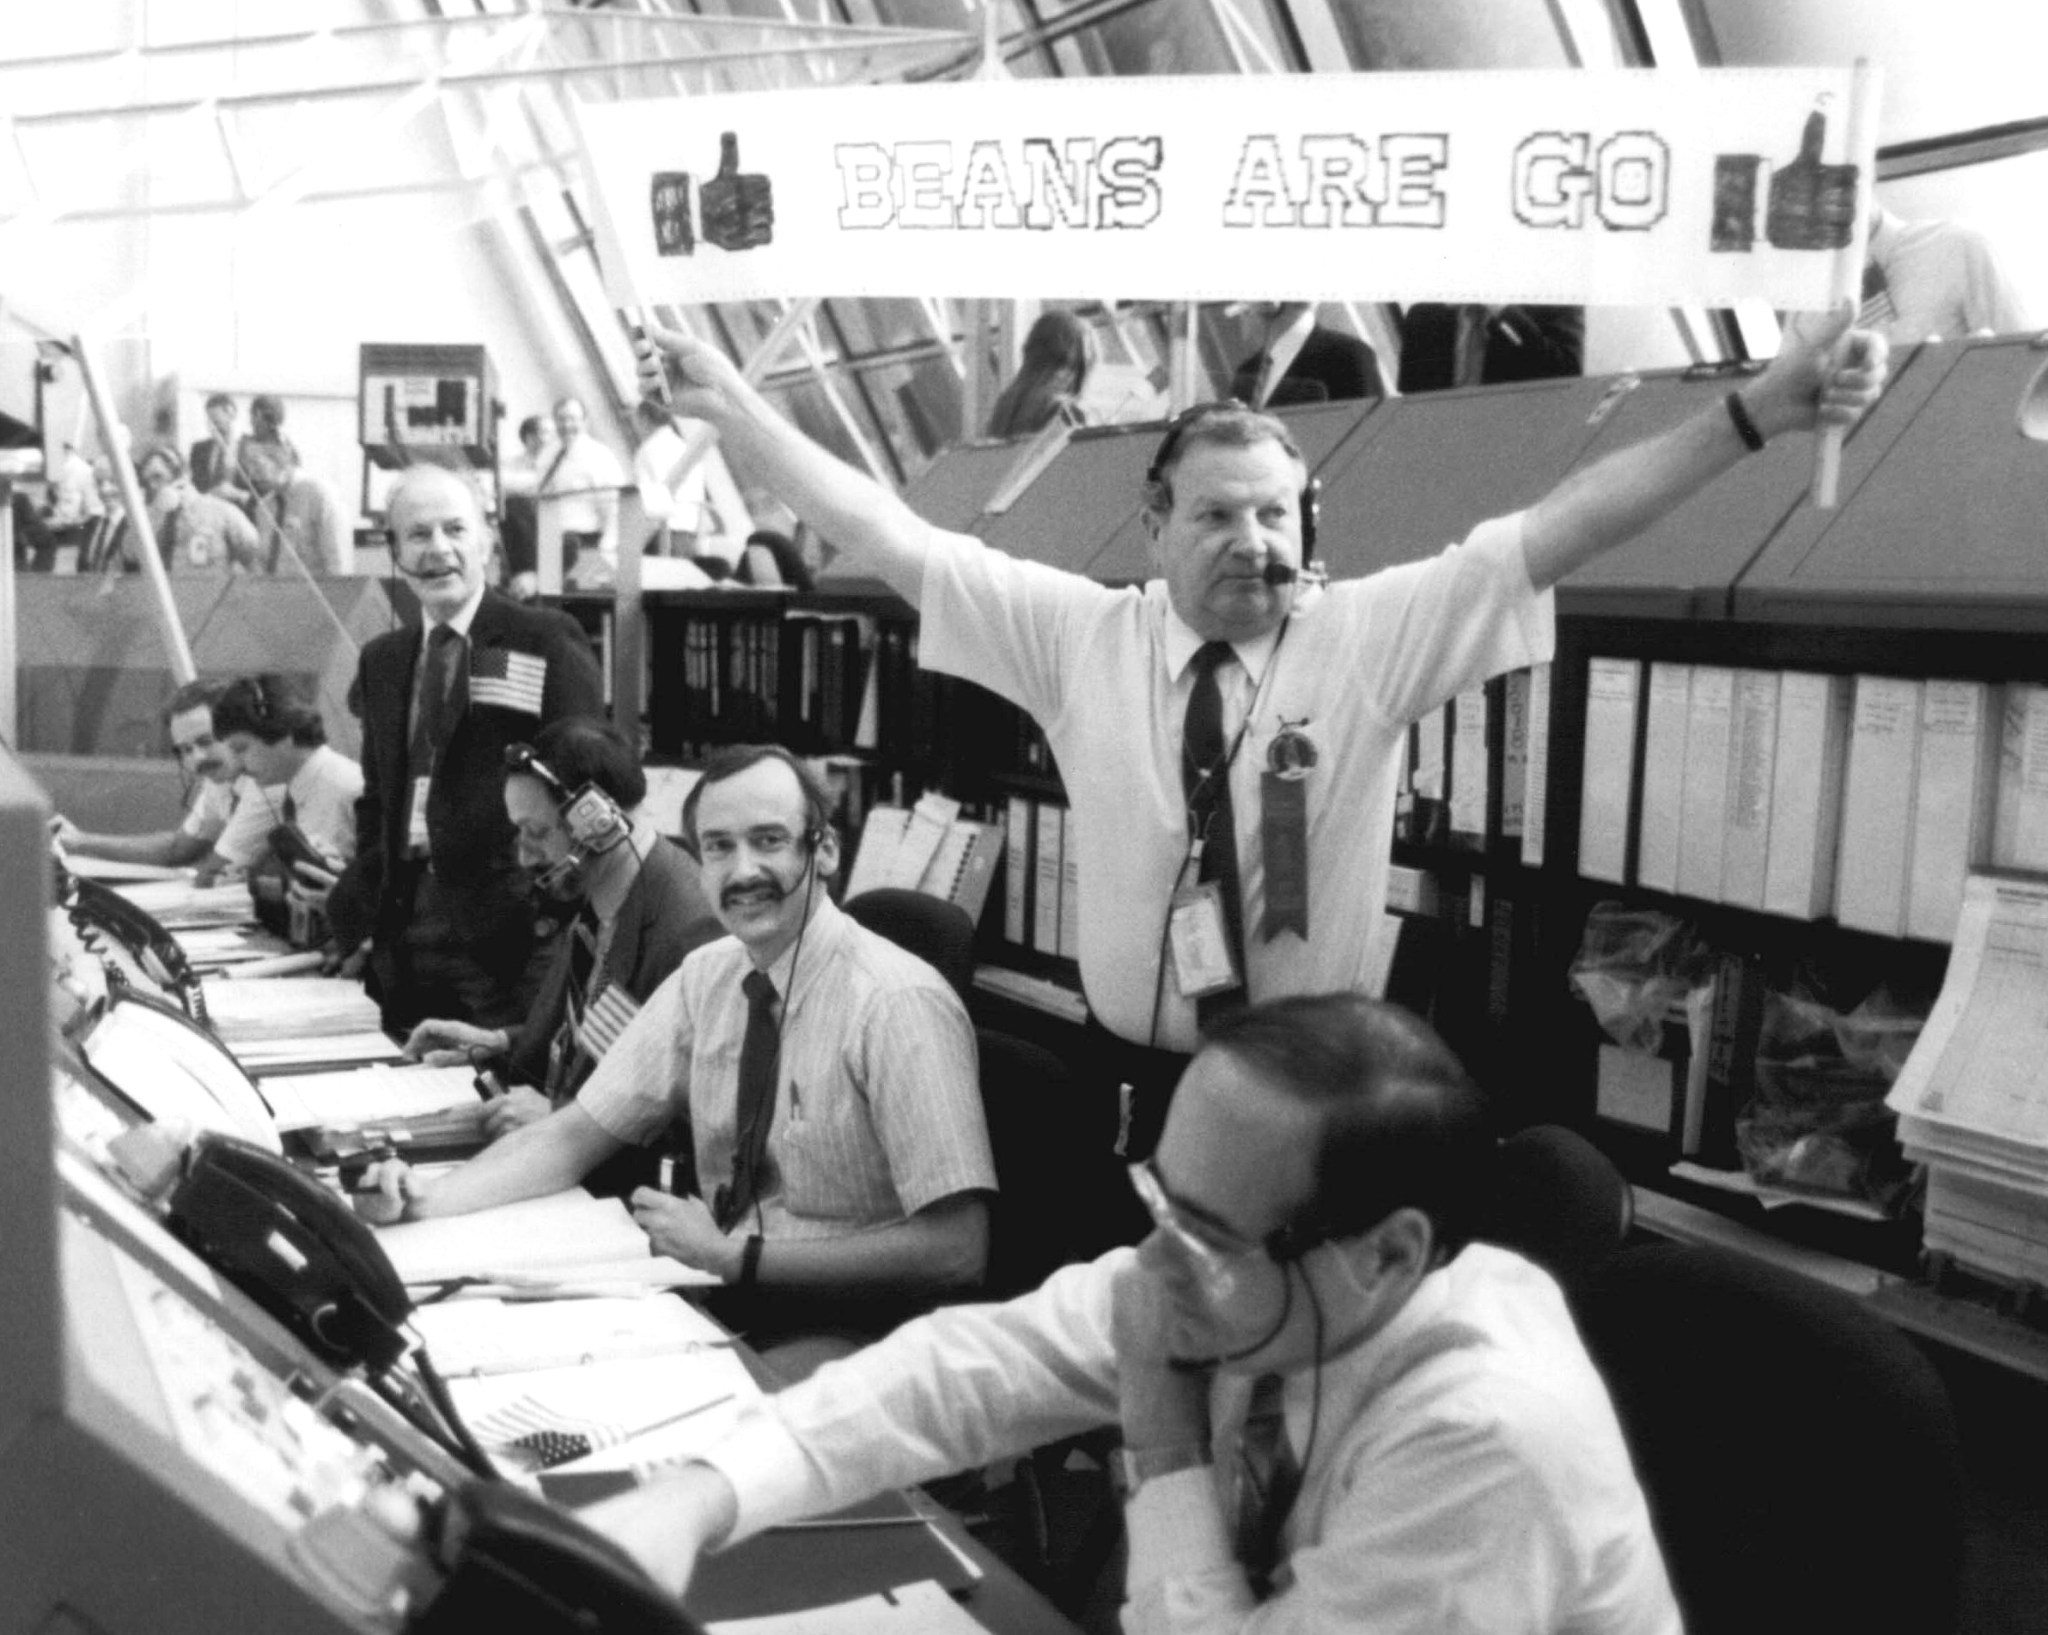 Former NASA Test Director Norm Carlson holds a "Beans are Go" sign in the Launch Control Center.